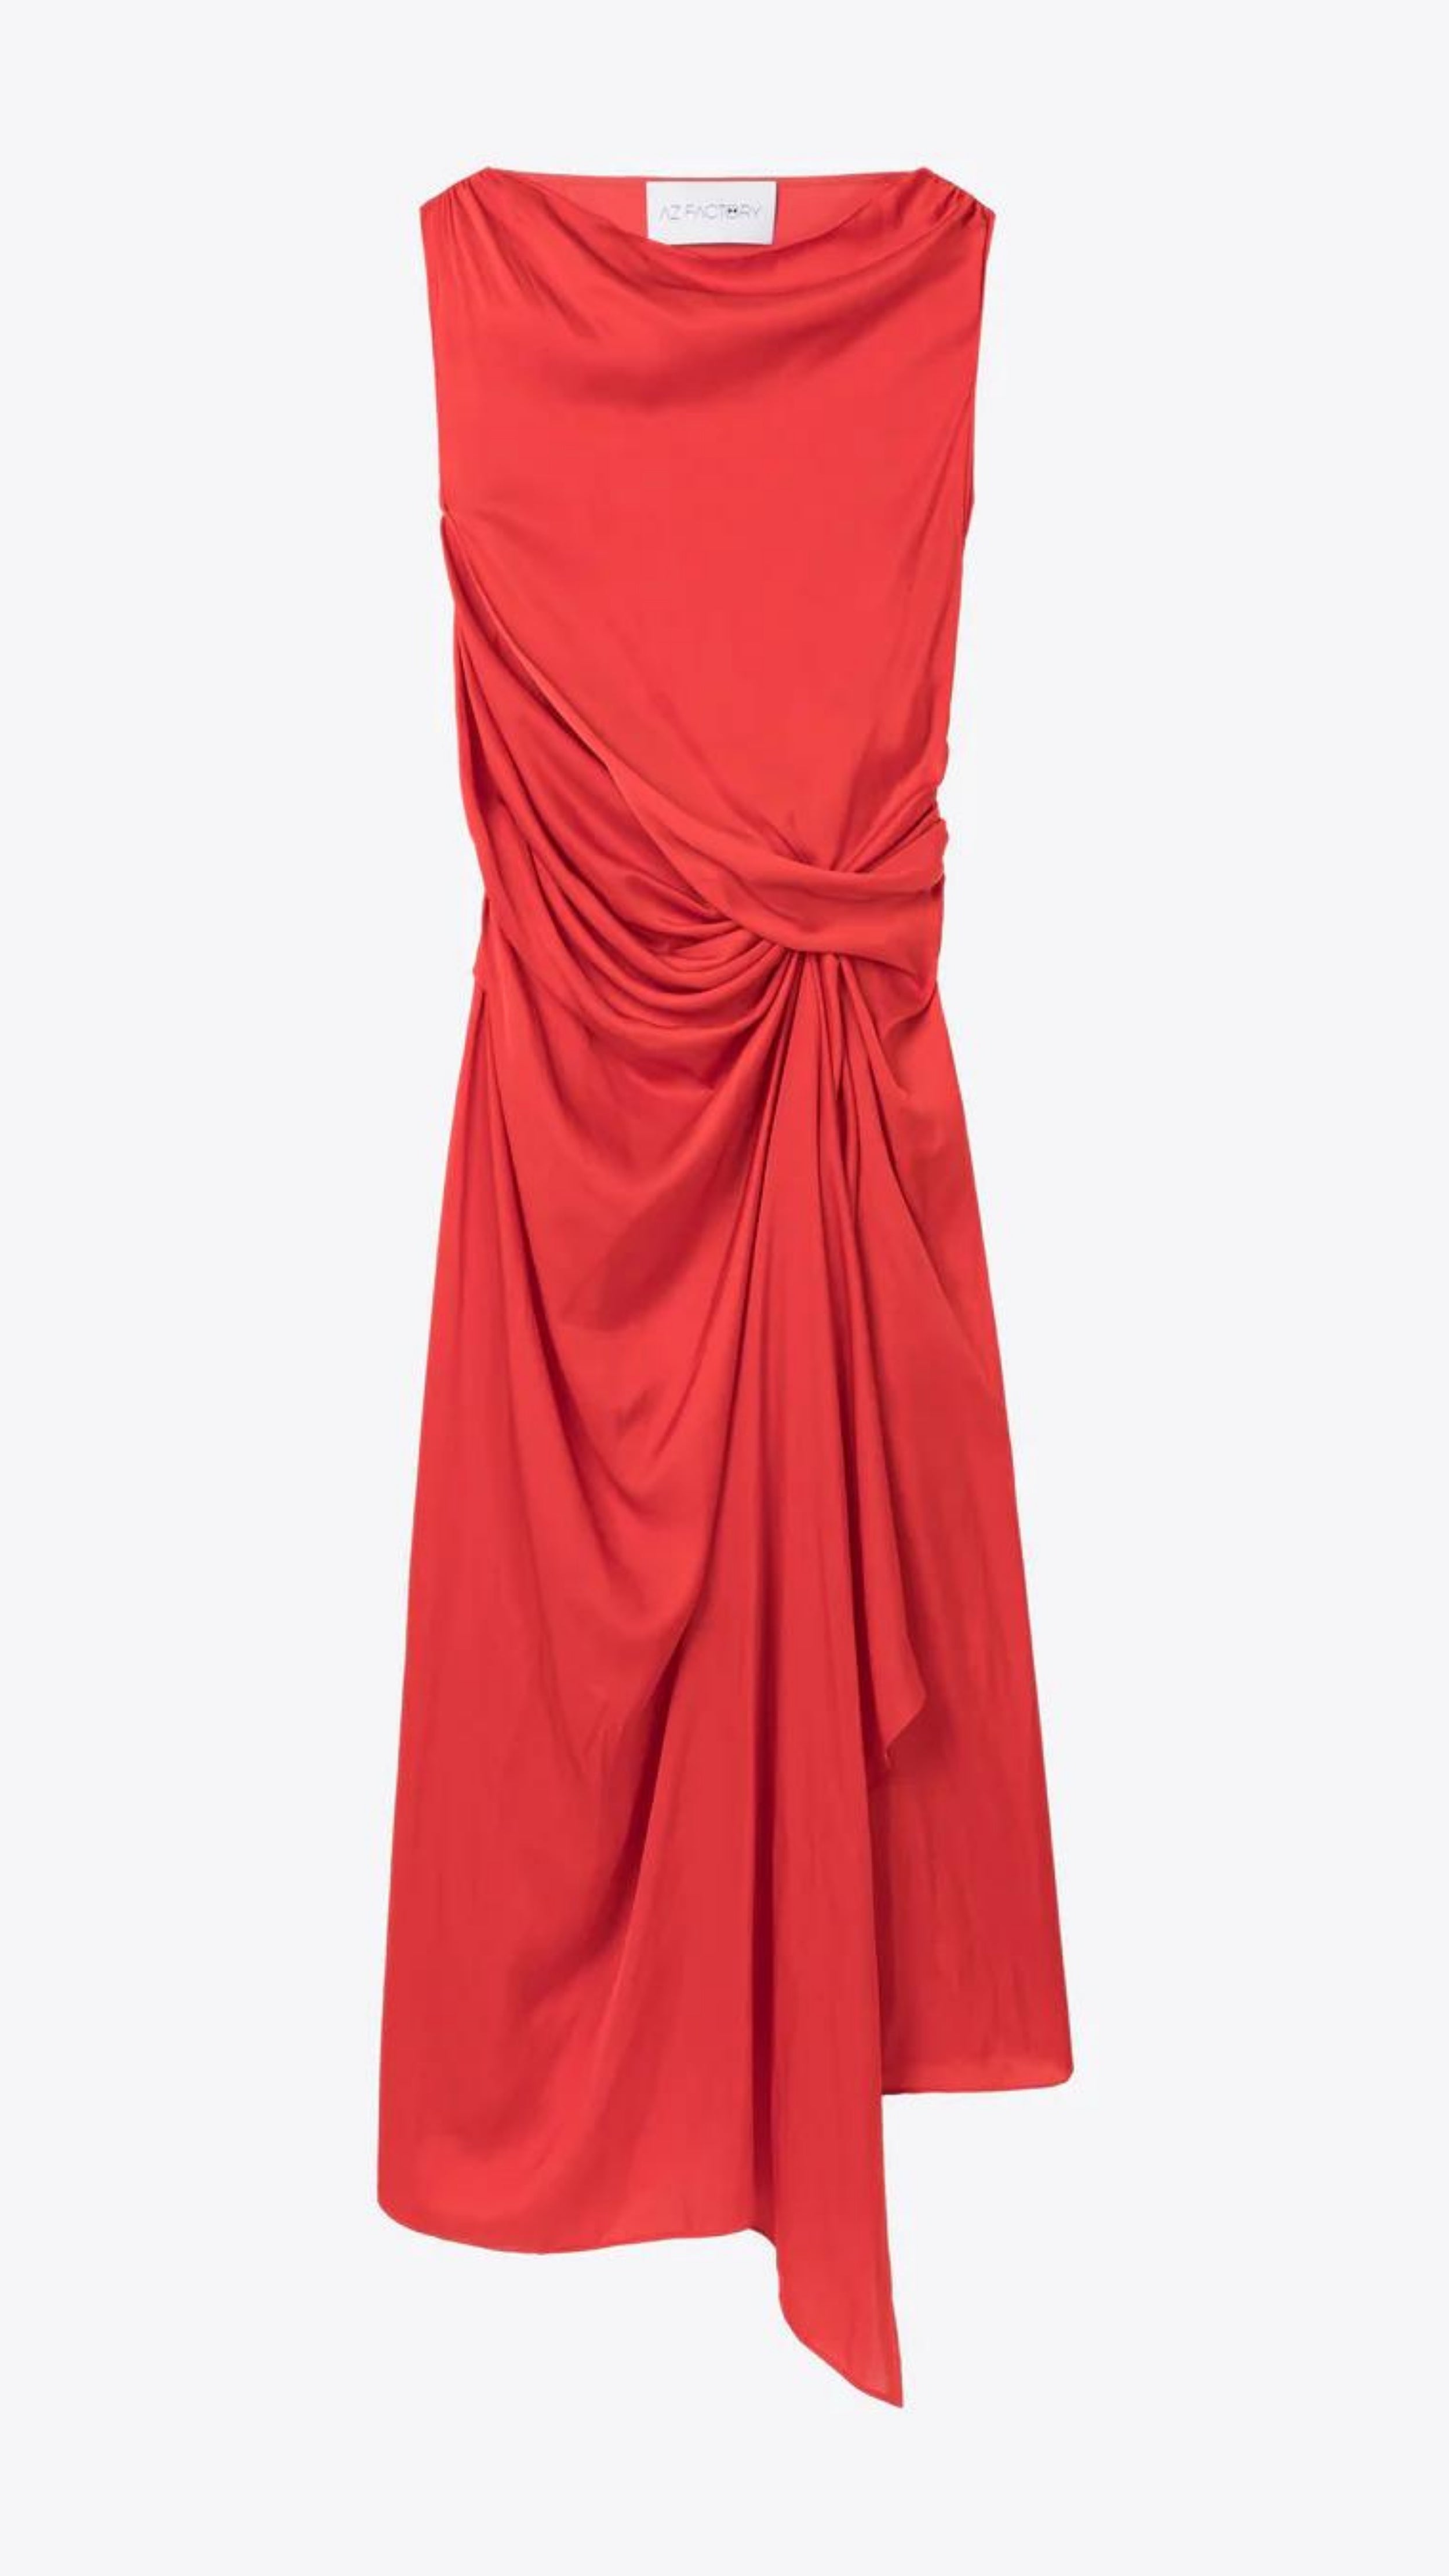 AZ Factory Colville Molly Molloy Lucinda Chambers, Sleeveless Draped Dress in Red An elegant red formal dress with a silhouette defined by a straight neckline and asymmetrical hemline. The waistline has detailed draping and the front leg as a slit. Flat front photo